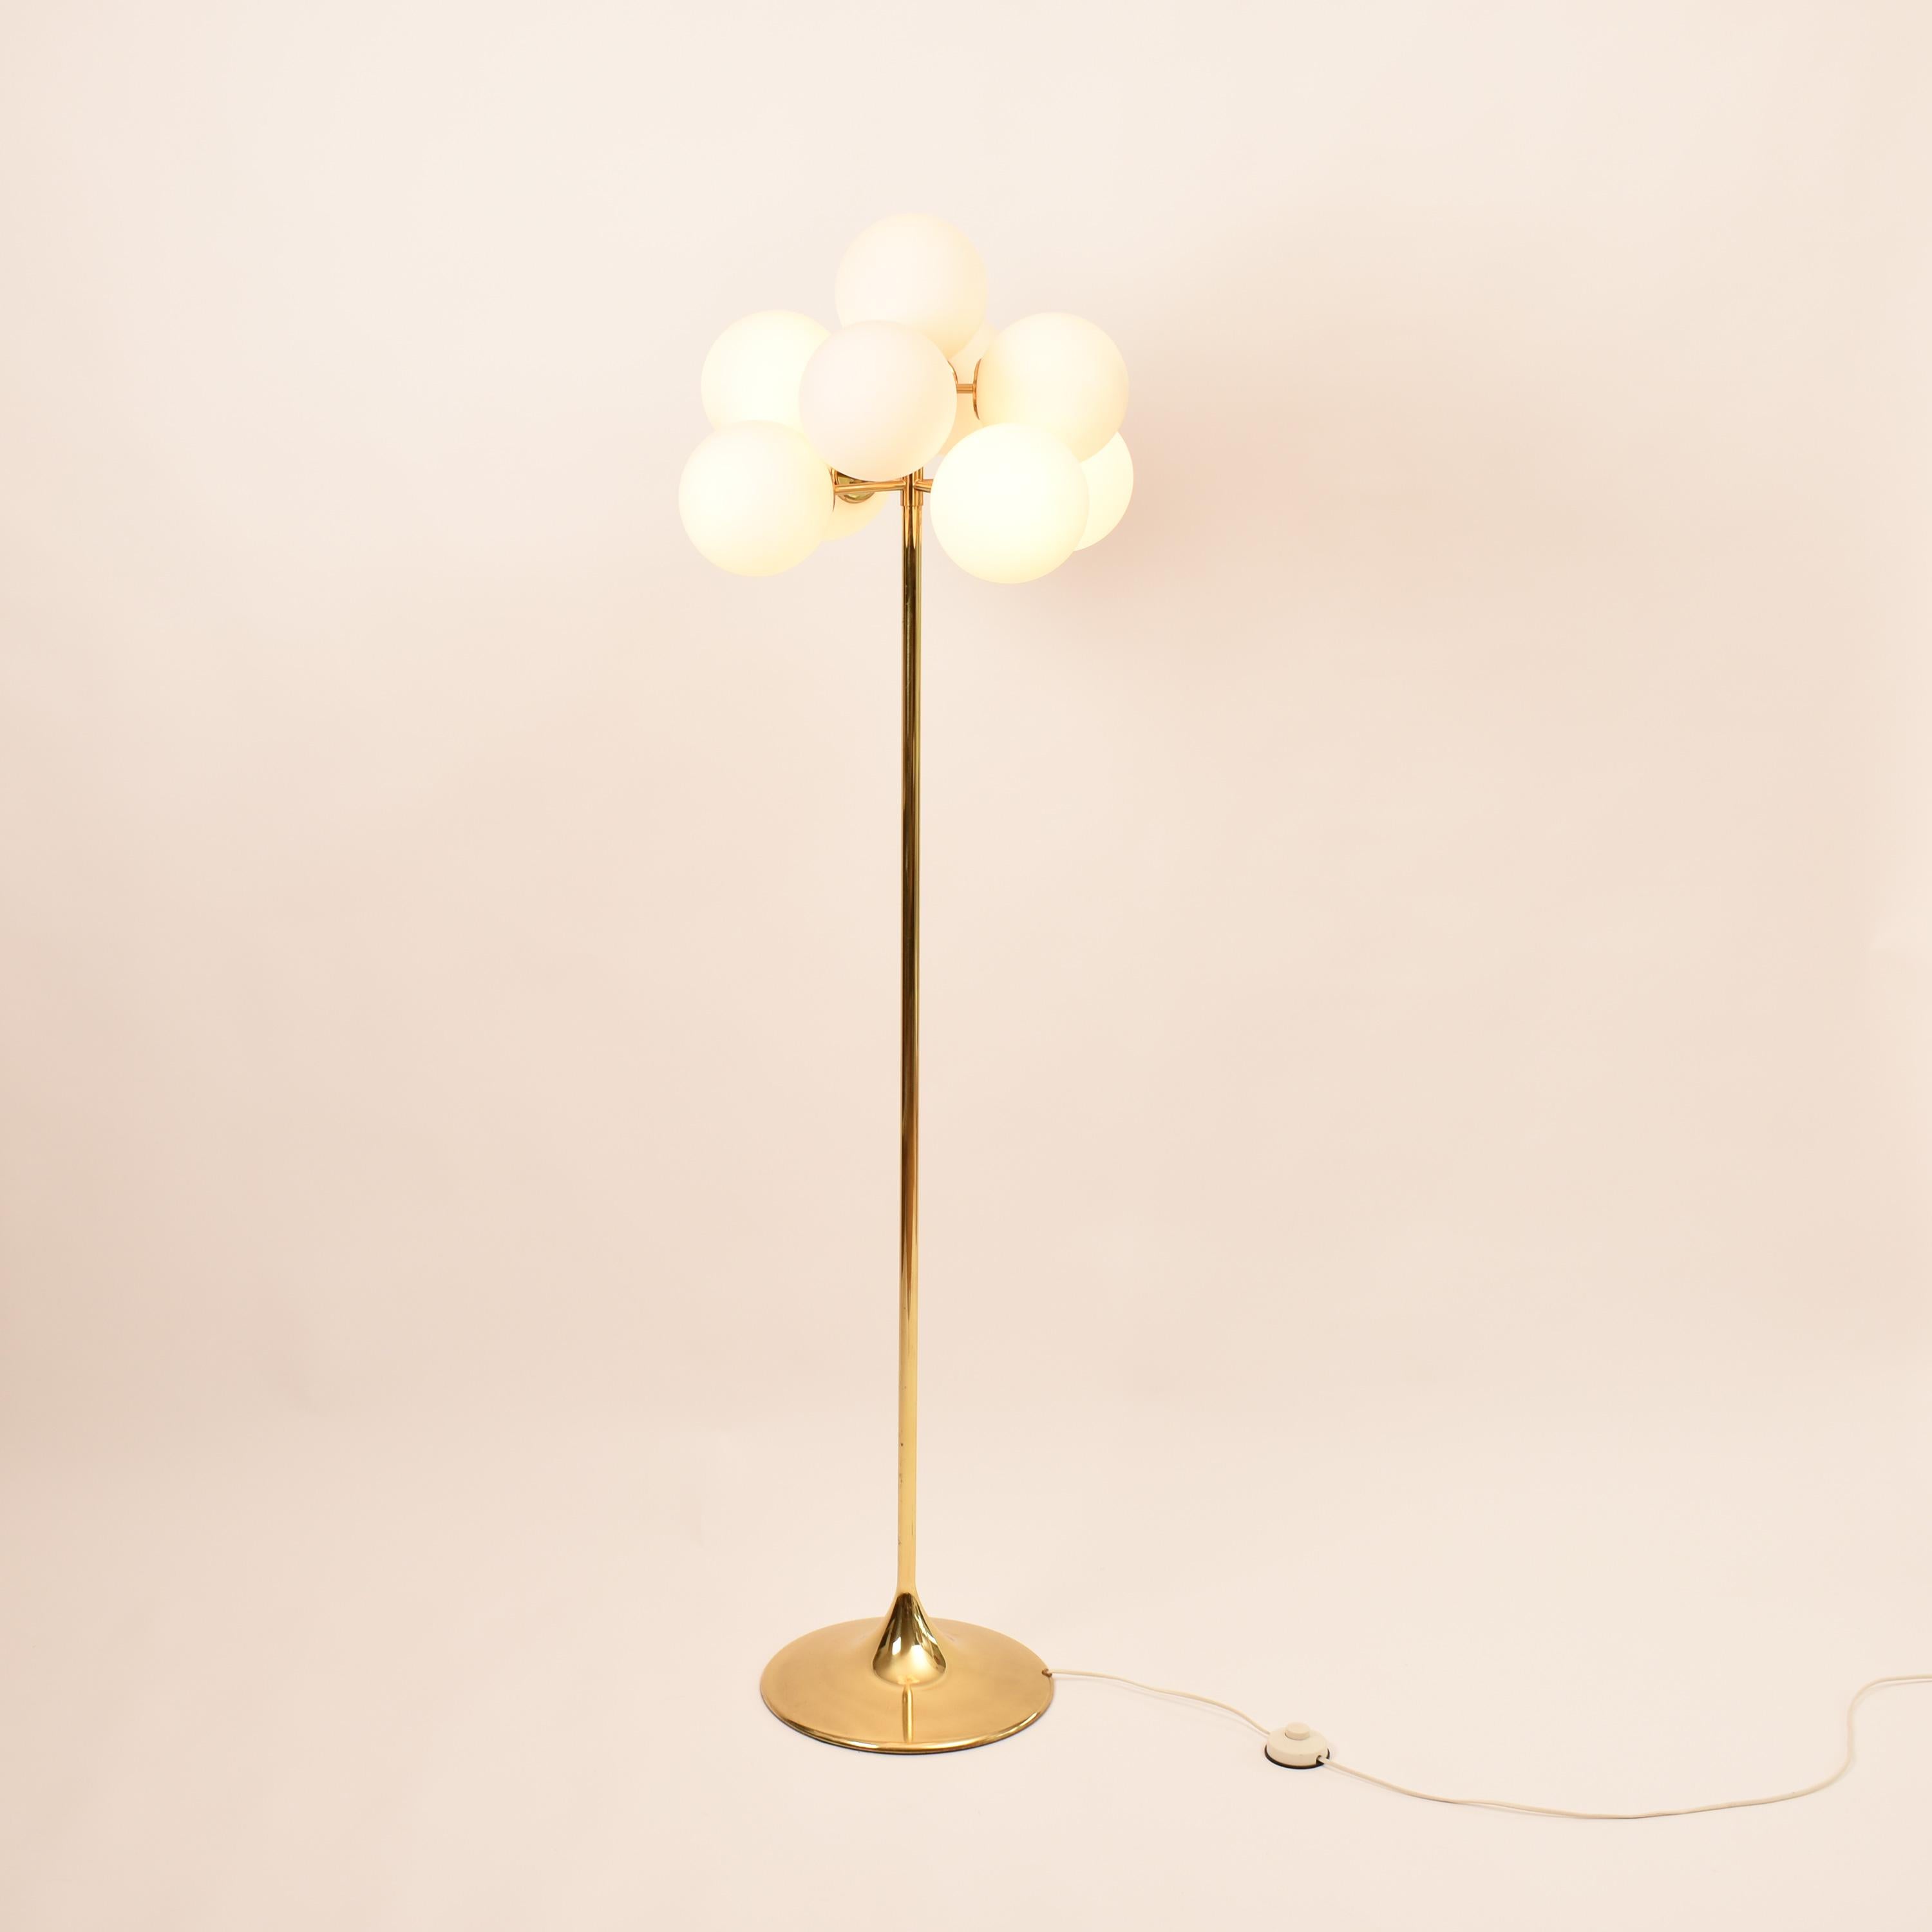 Swiss Mid-Century Modern Atomic Floor Lamp Gold and White By E.R. Nele for Temde 1960